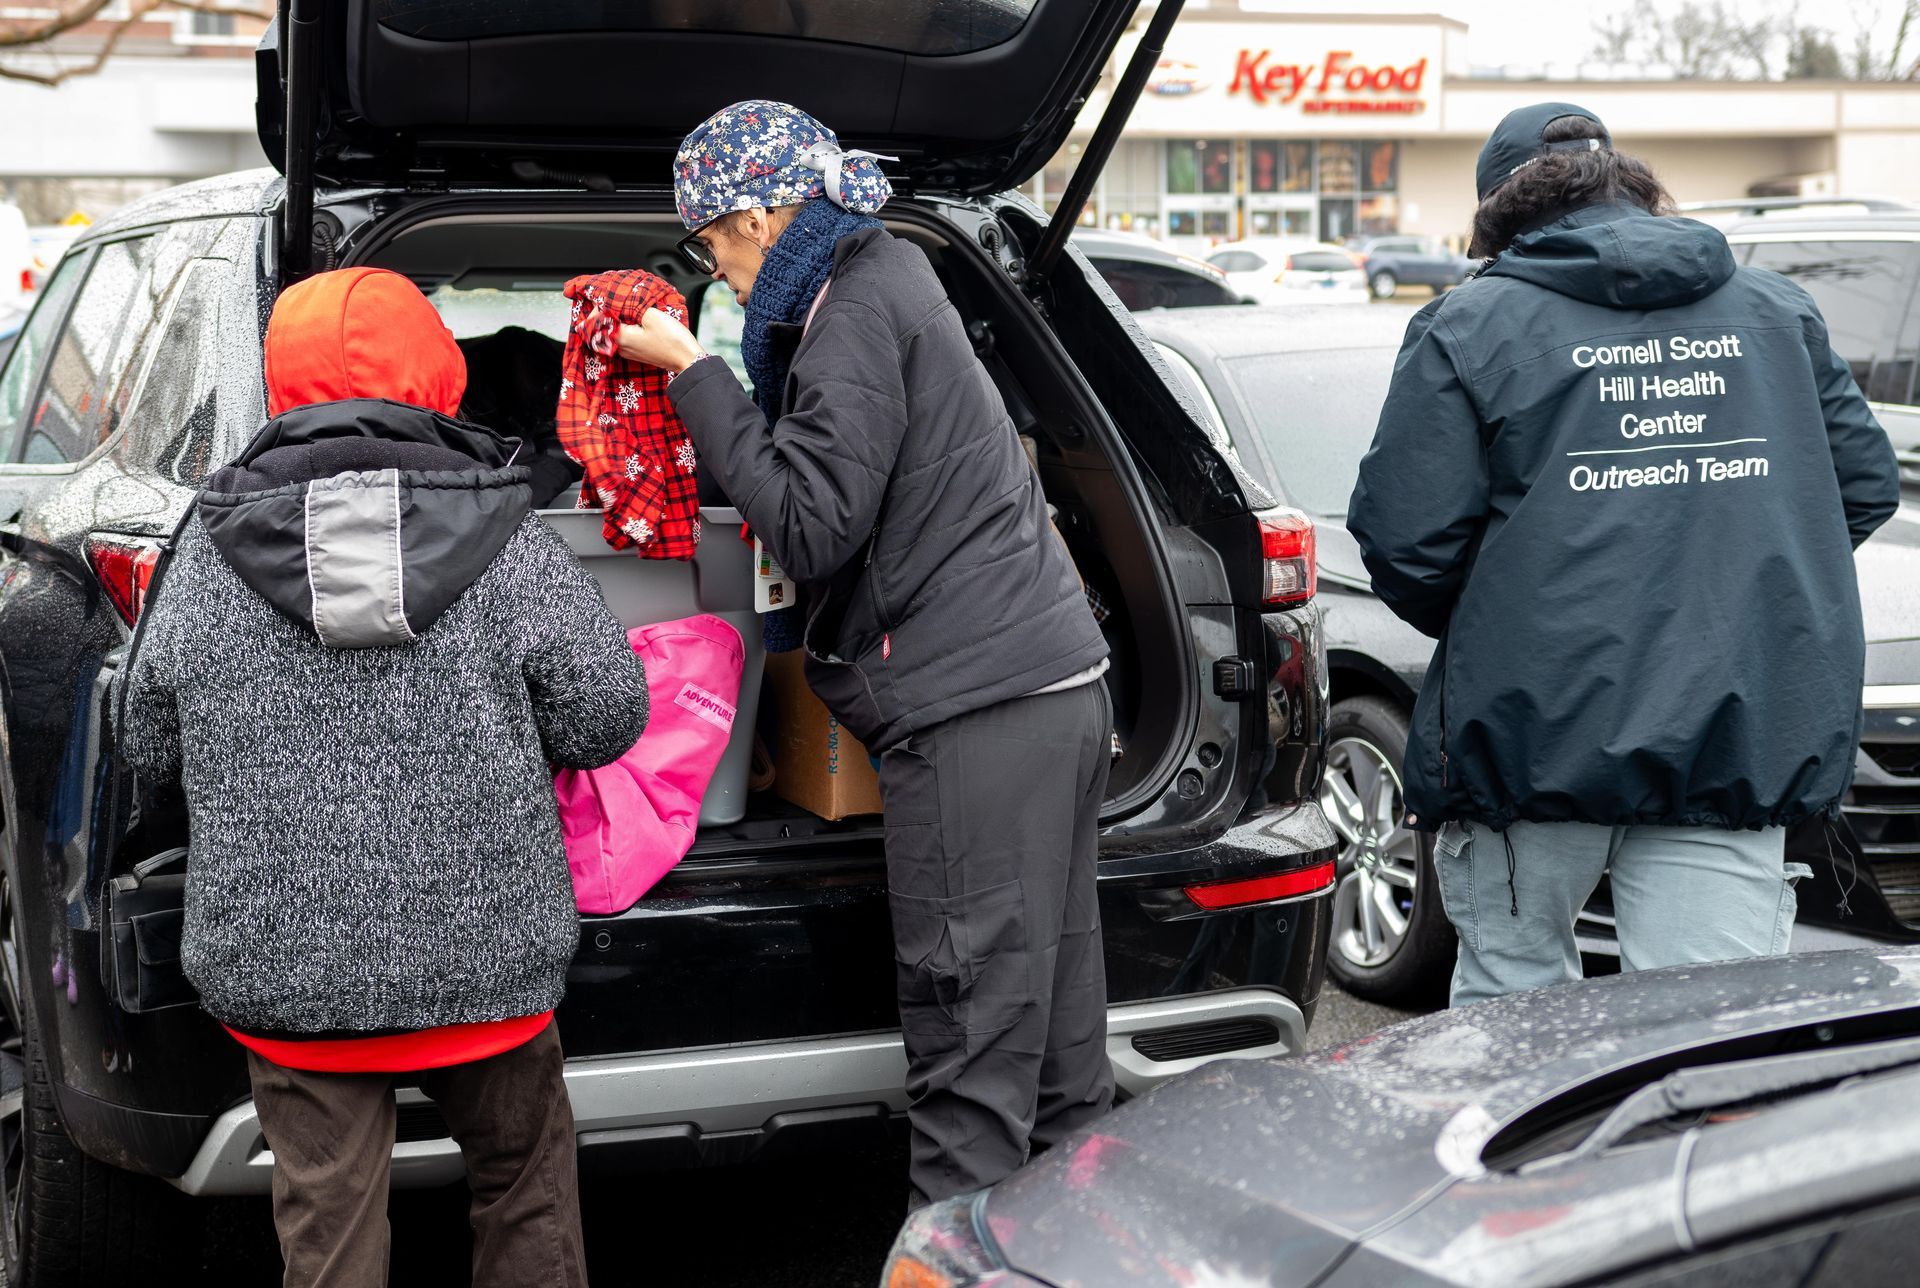 Outreach team employees taking items out of a car